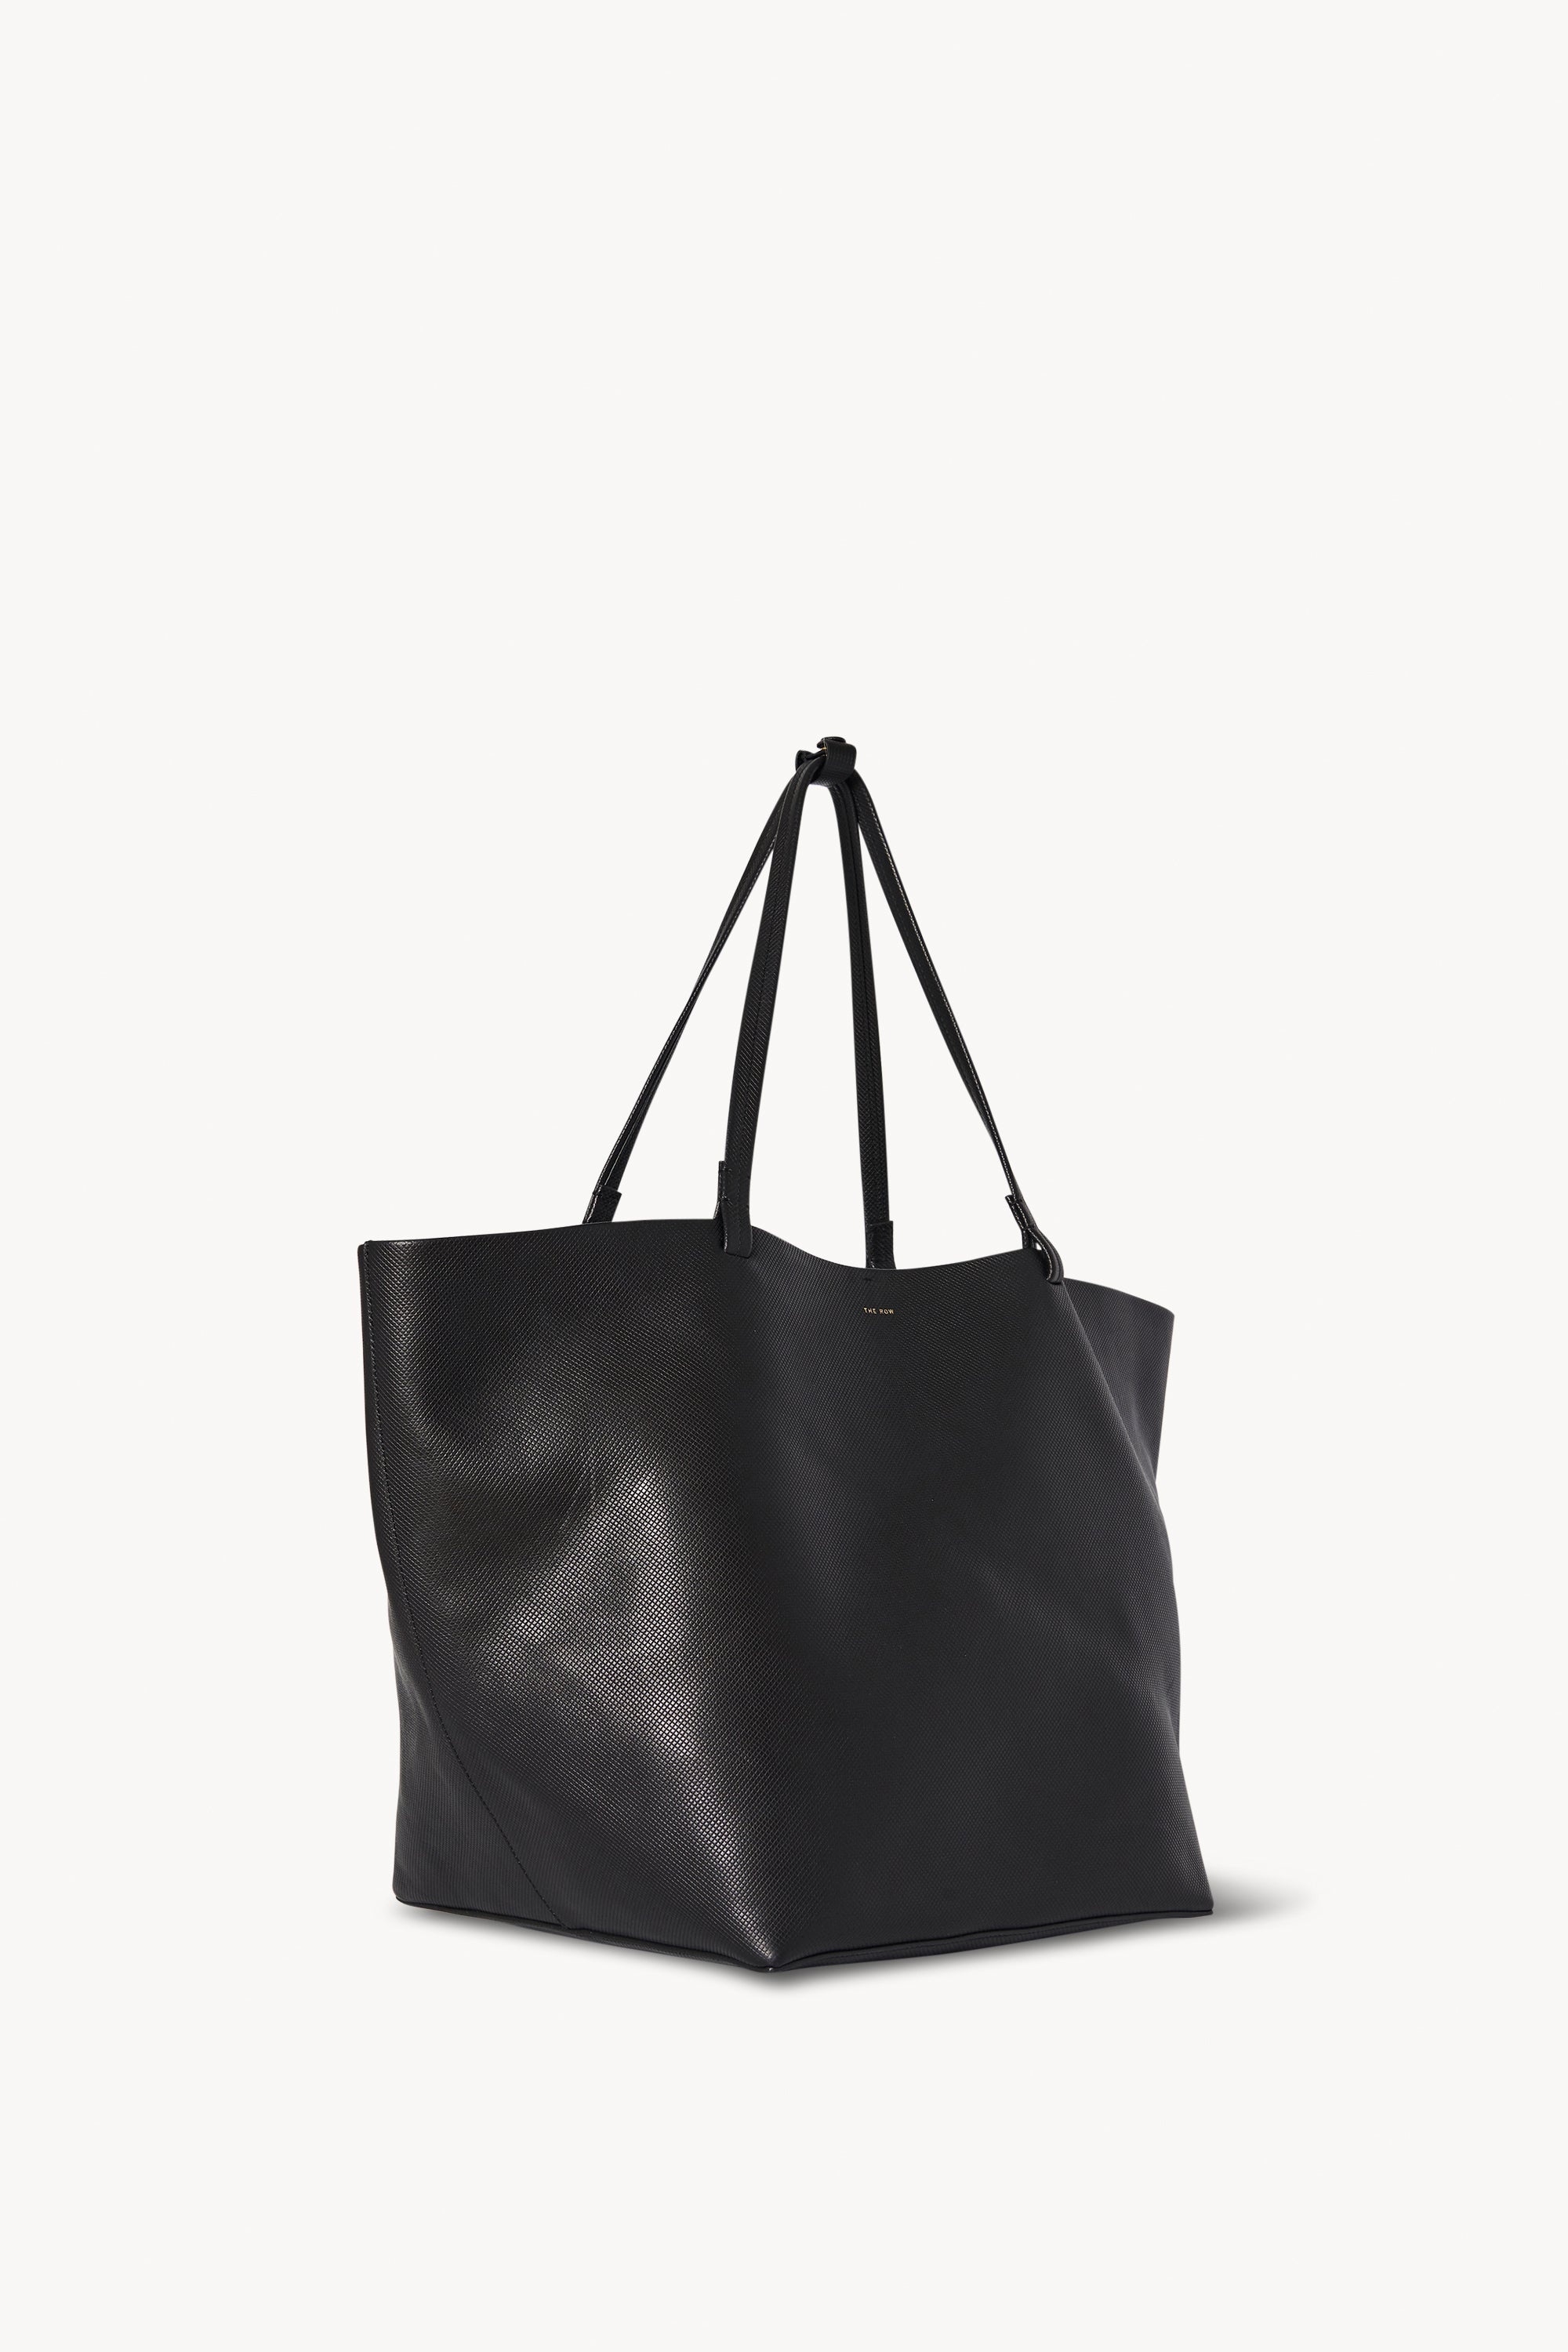 Park Tote Three Bag in Leather - 2